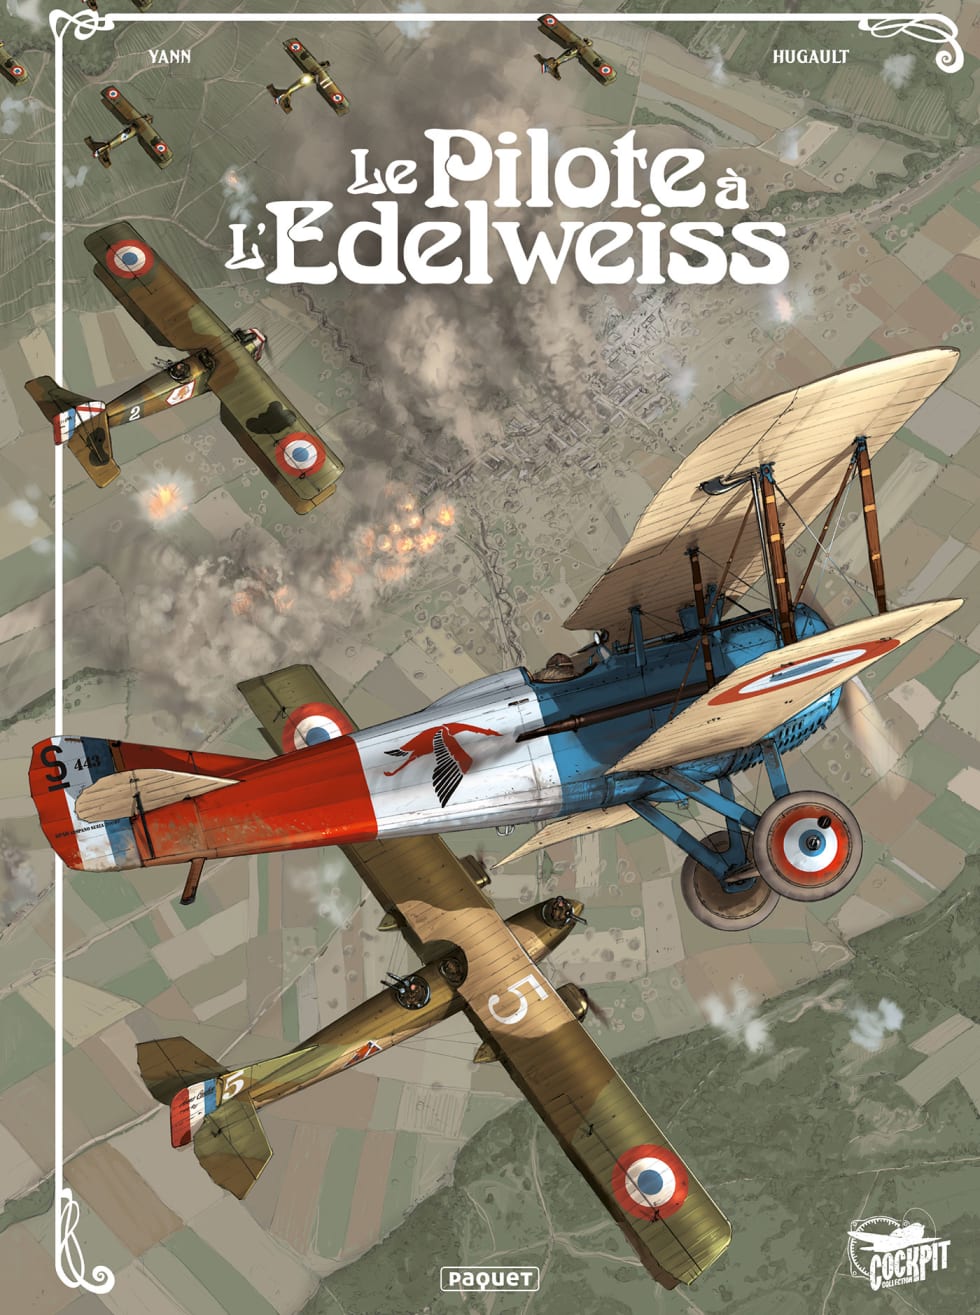 Comic Bookcover. “The Pilot in the Edelweiss” Complete Collection, 15 years